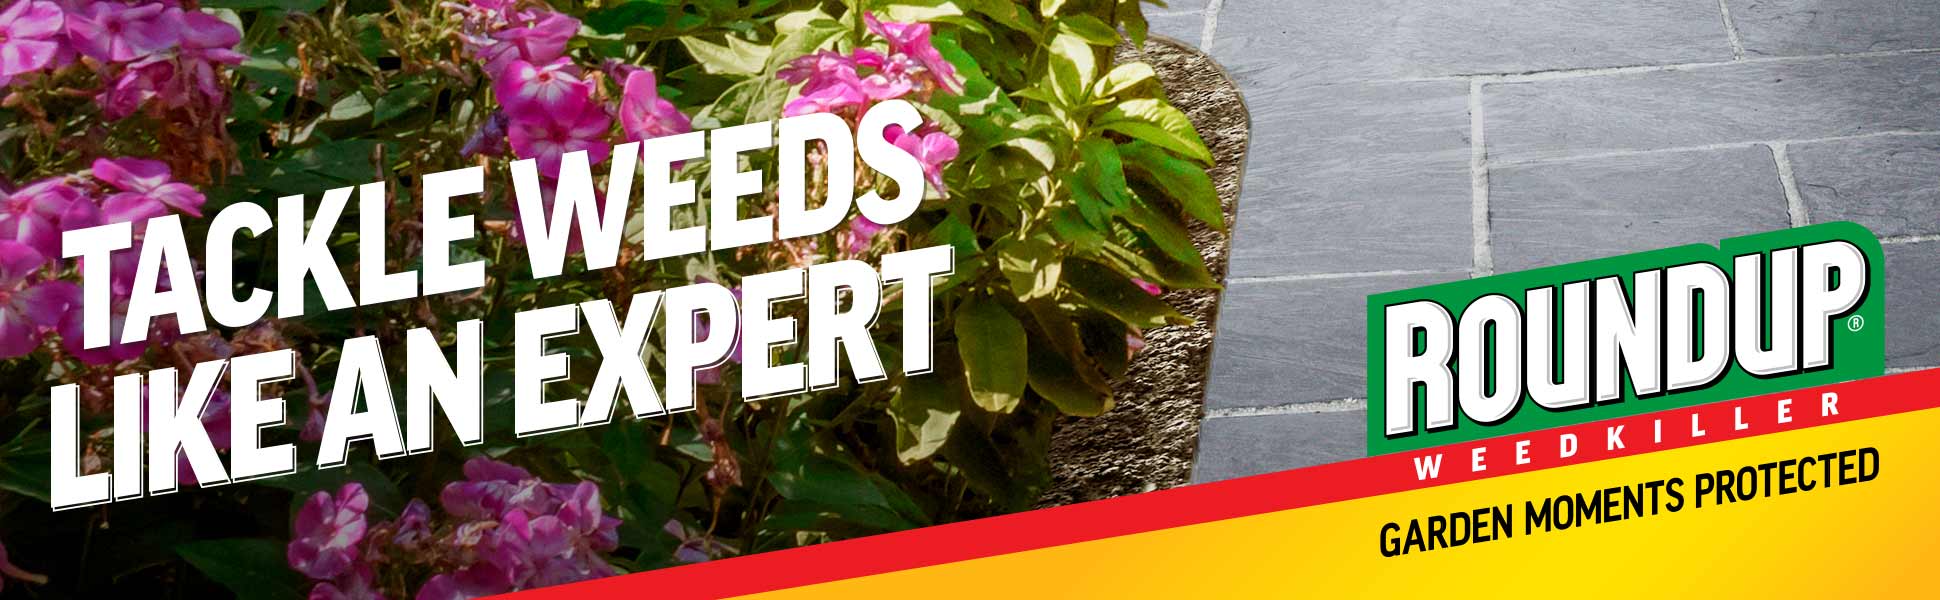 ROUNDUP® - Tackle Weeds Like An Expert - Garden Moments Protected